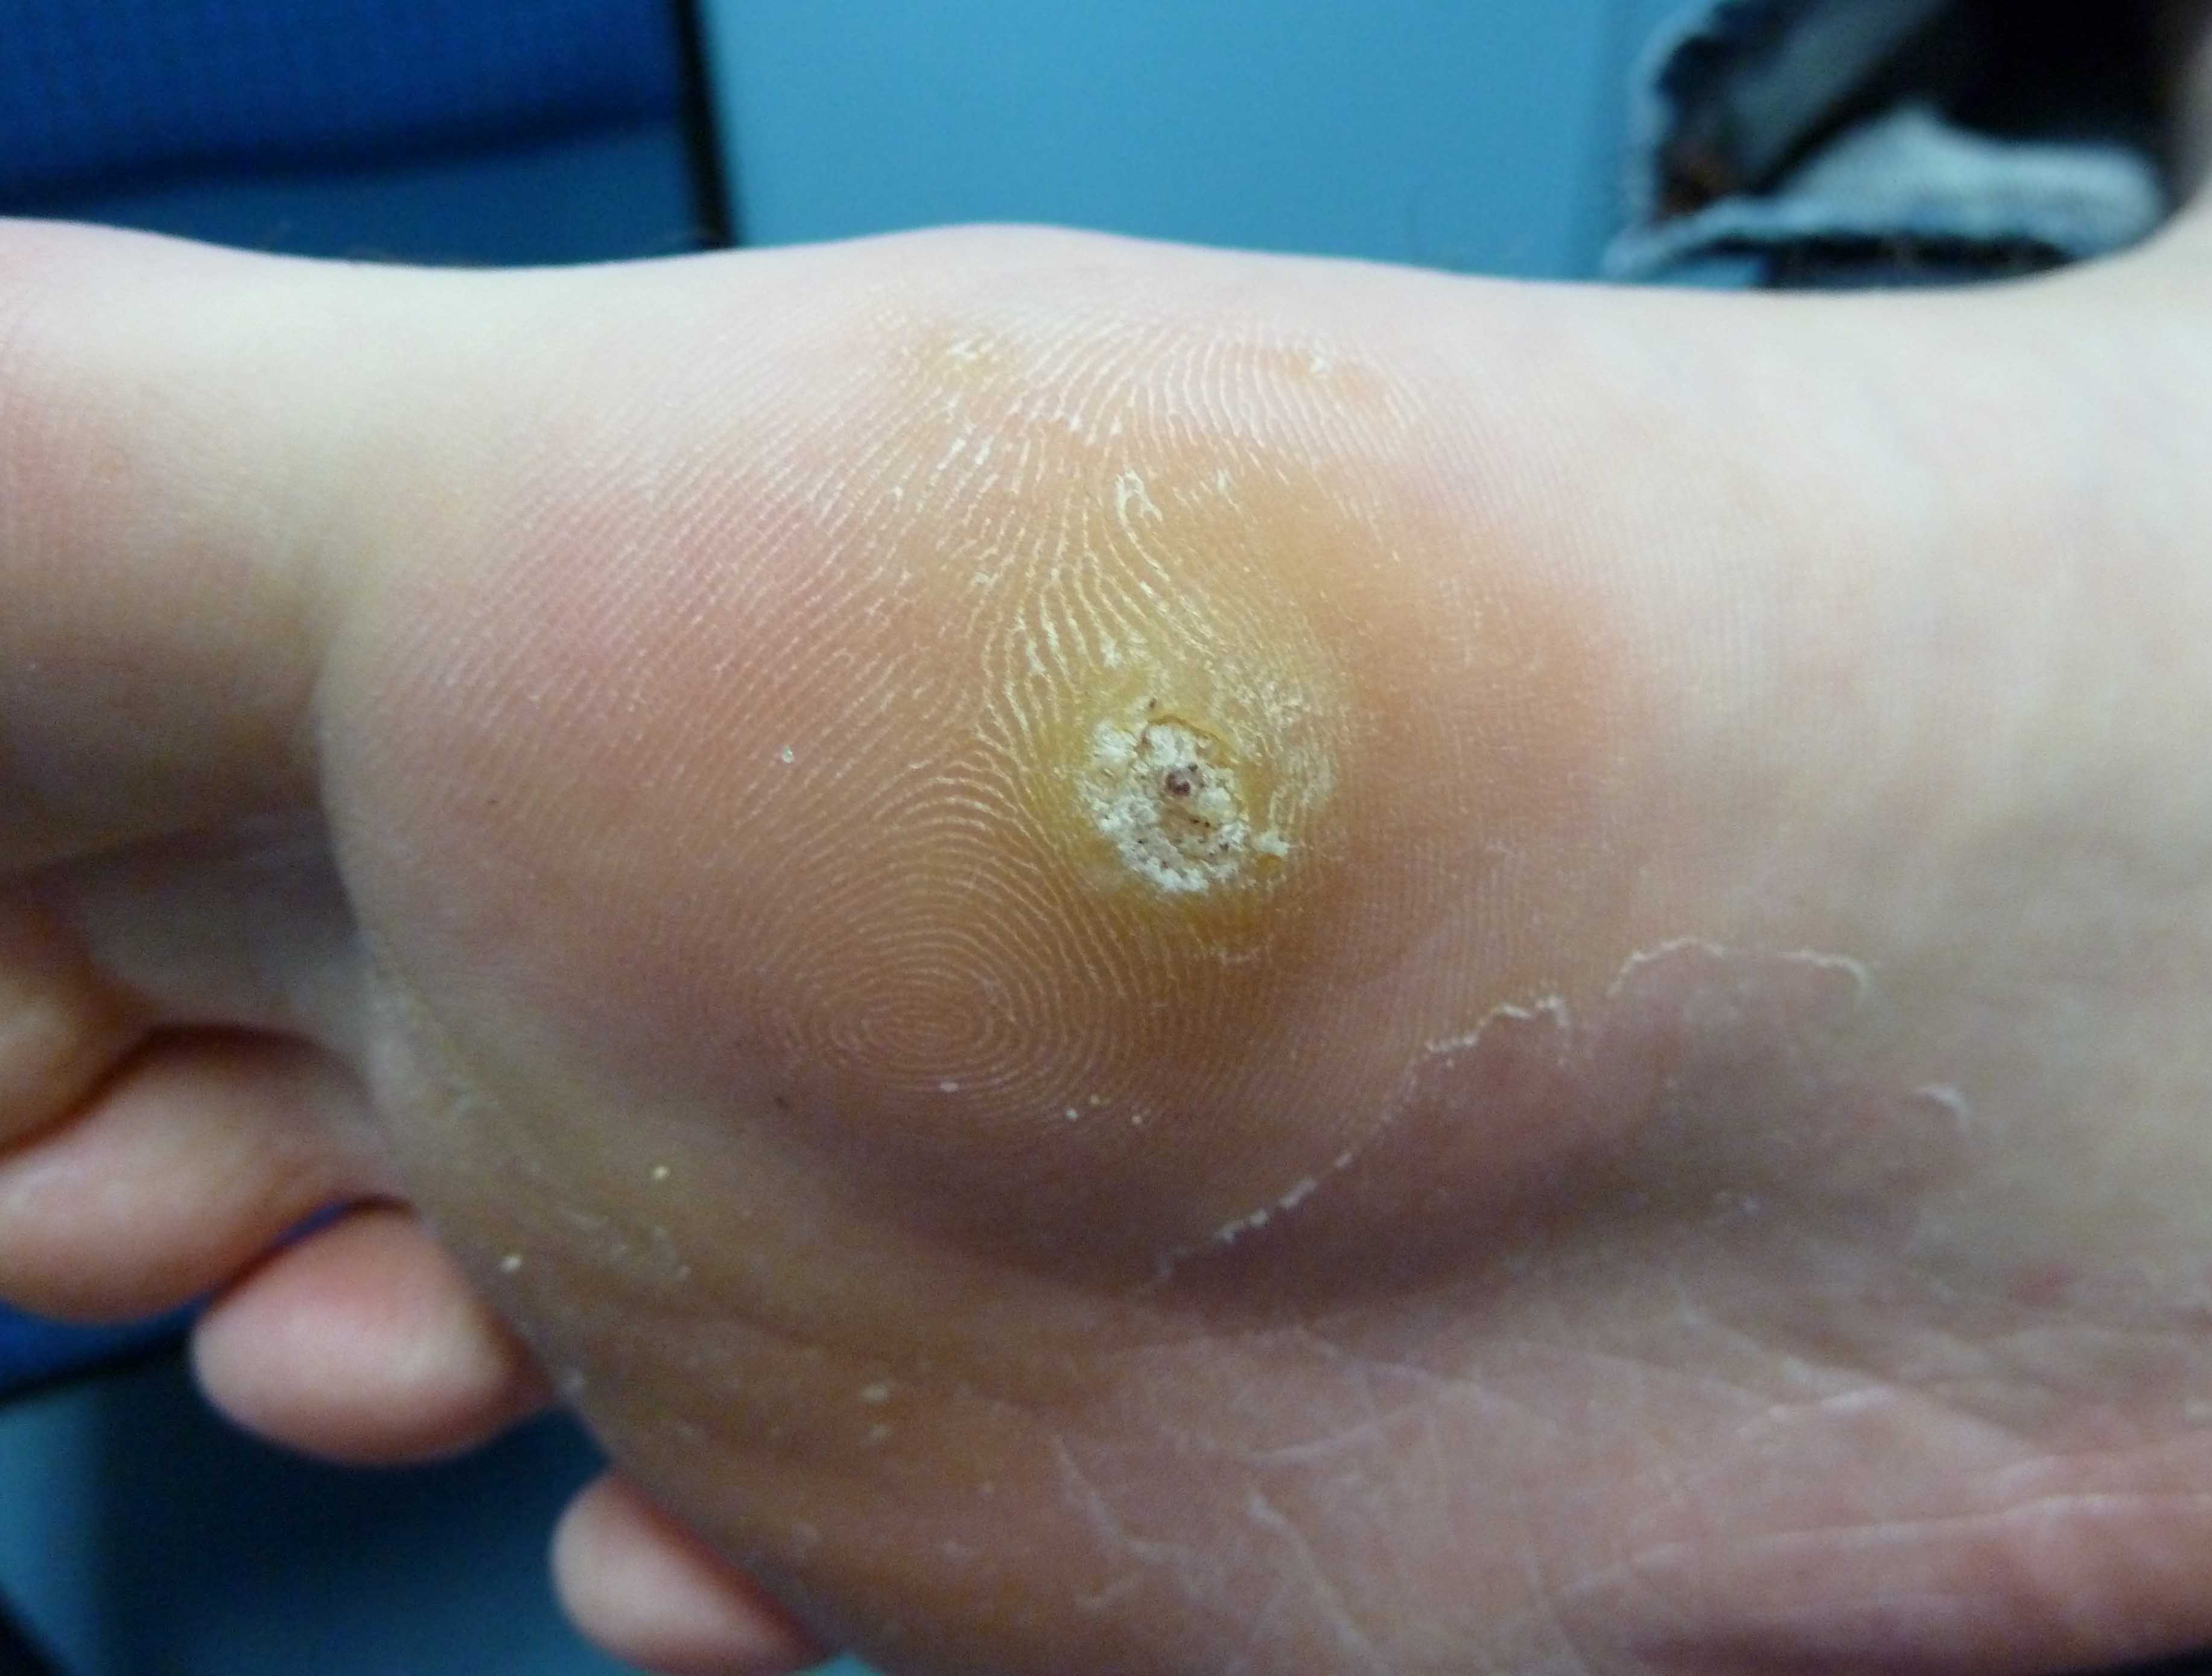 How to Get Rid of Plantar Warts - Removal and Treatment ...